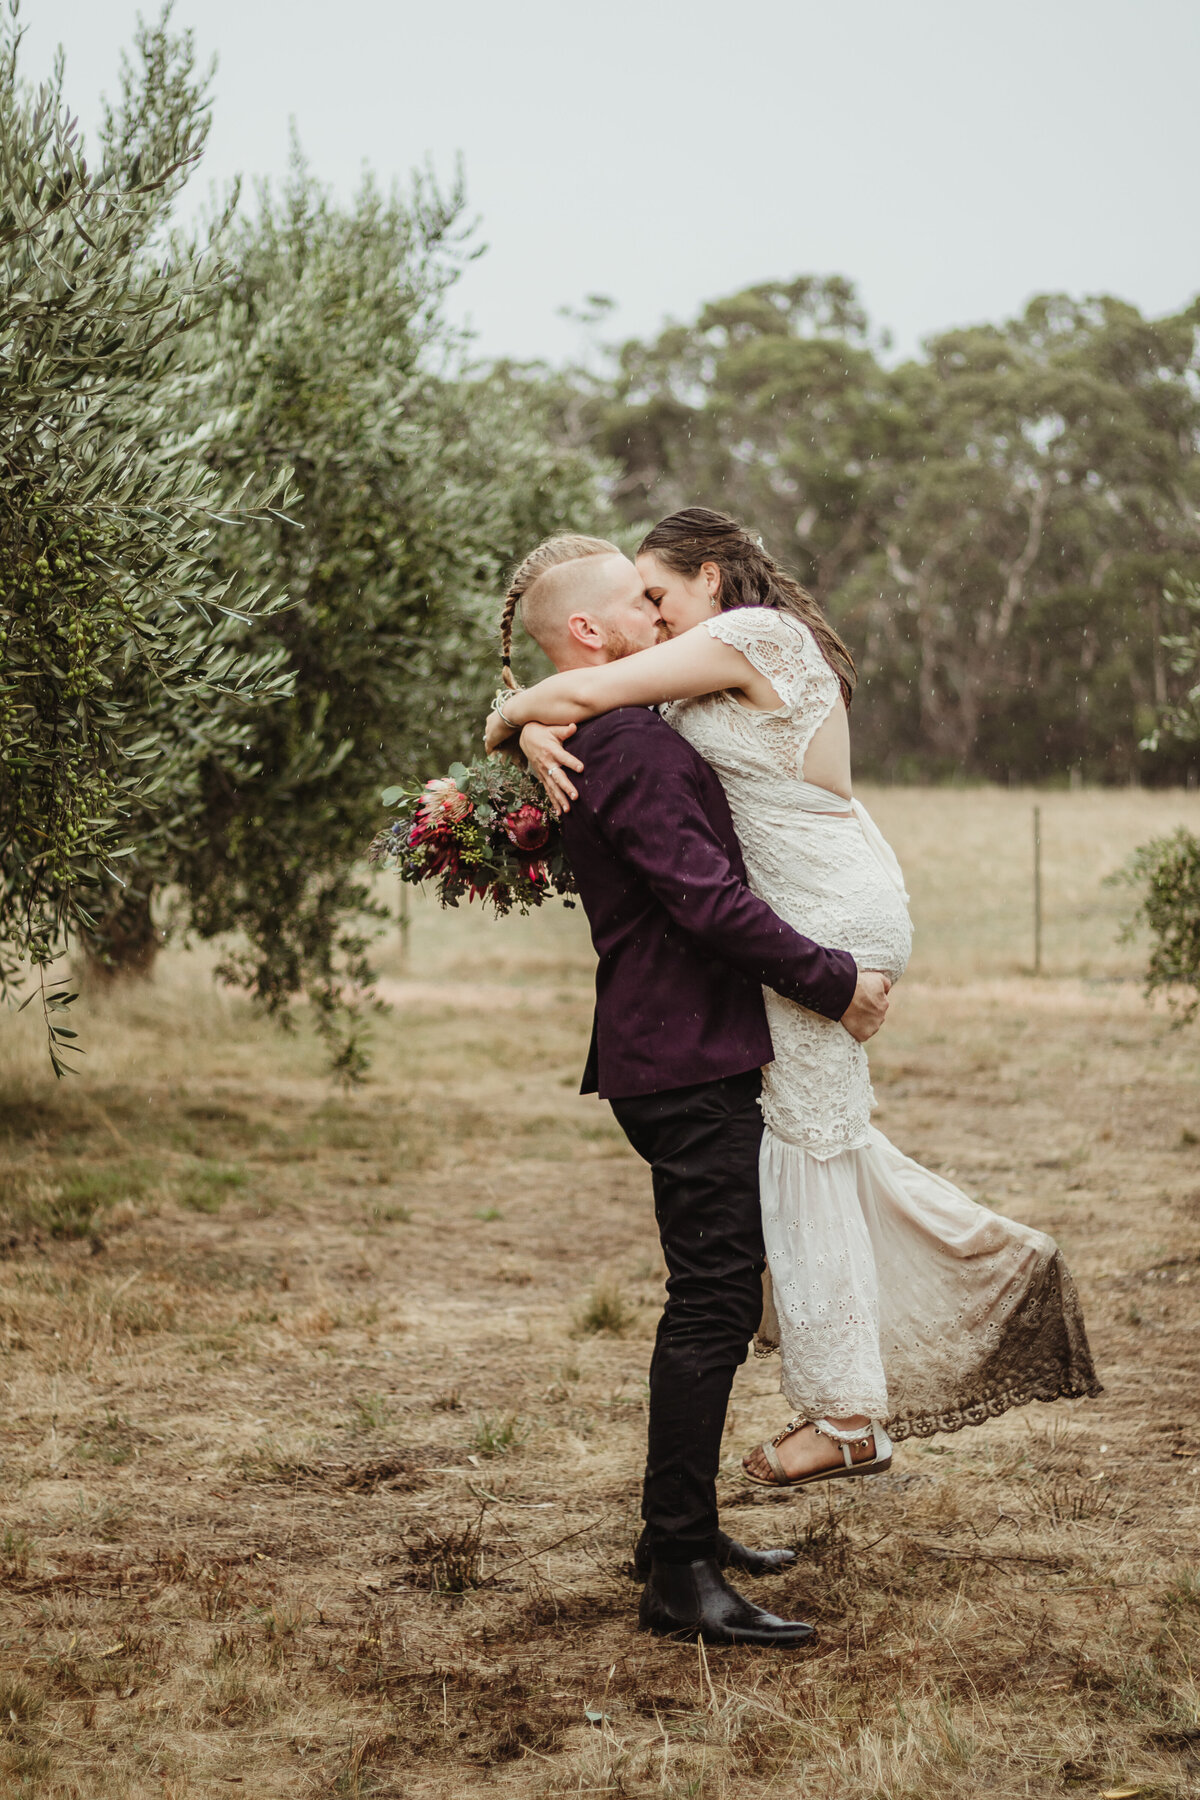 wedding-in-the-rain-rose-and-thistle-photography-australia-australian-wedding-photographer-melbourne-wedding-photographer-family-photography-beach-photo-session